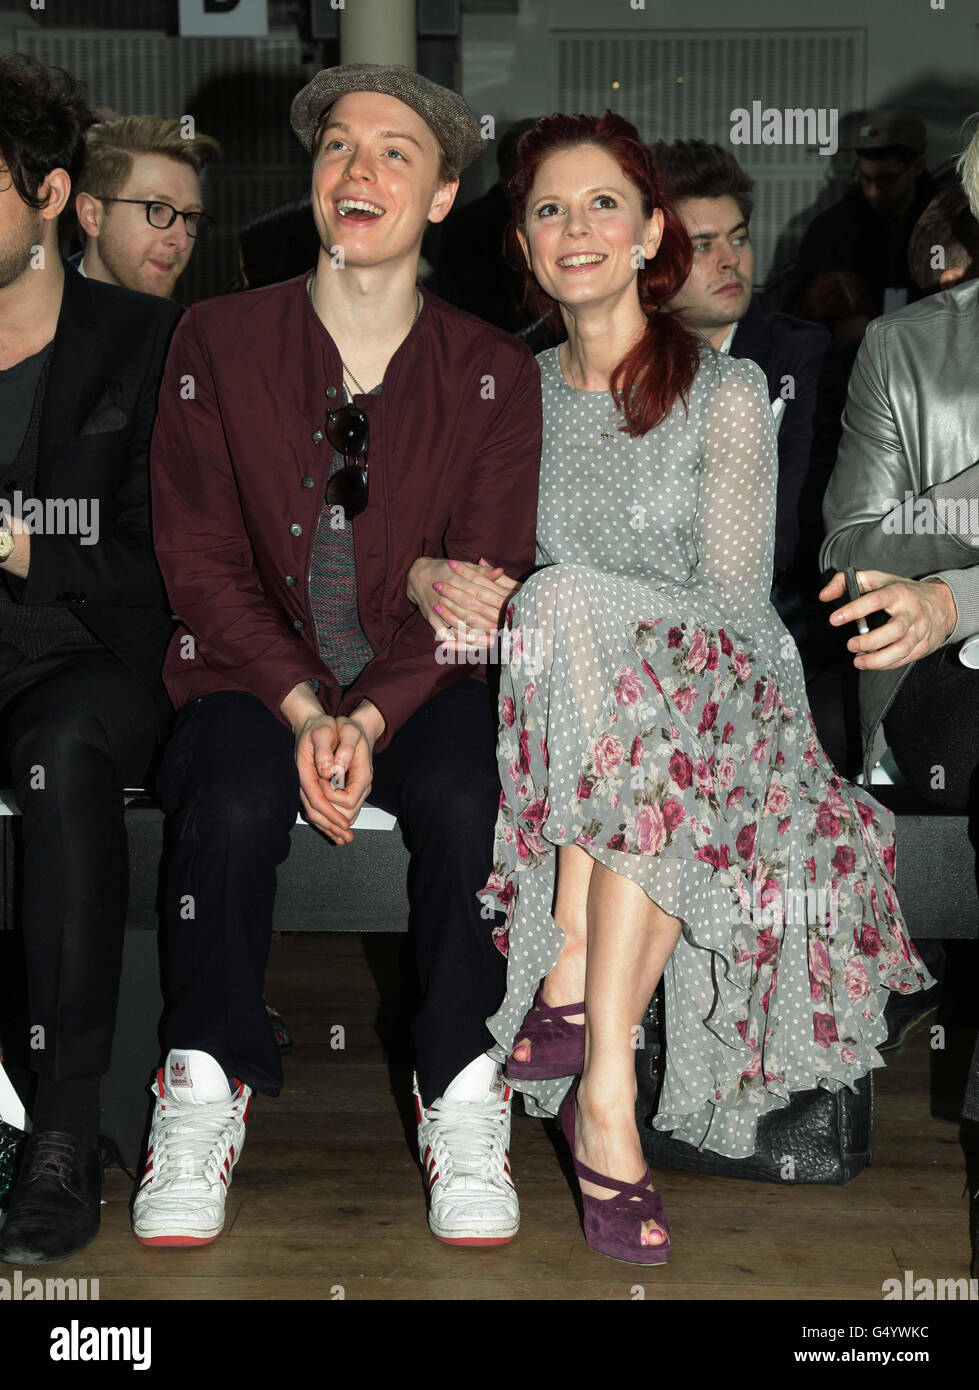 Emilia Fox and her brother Freddie attending the TOPMAN Design autumn/winter London Fashion Week show, at the Royal Opera House in central London. Stock Photo